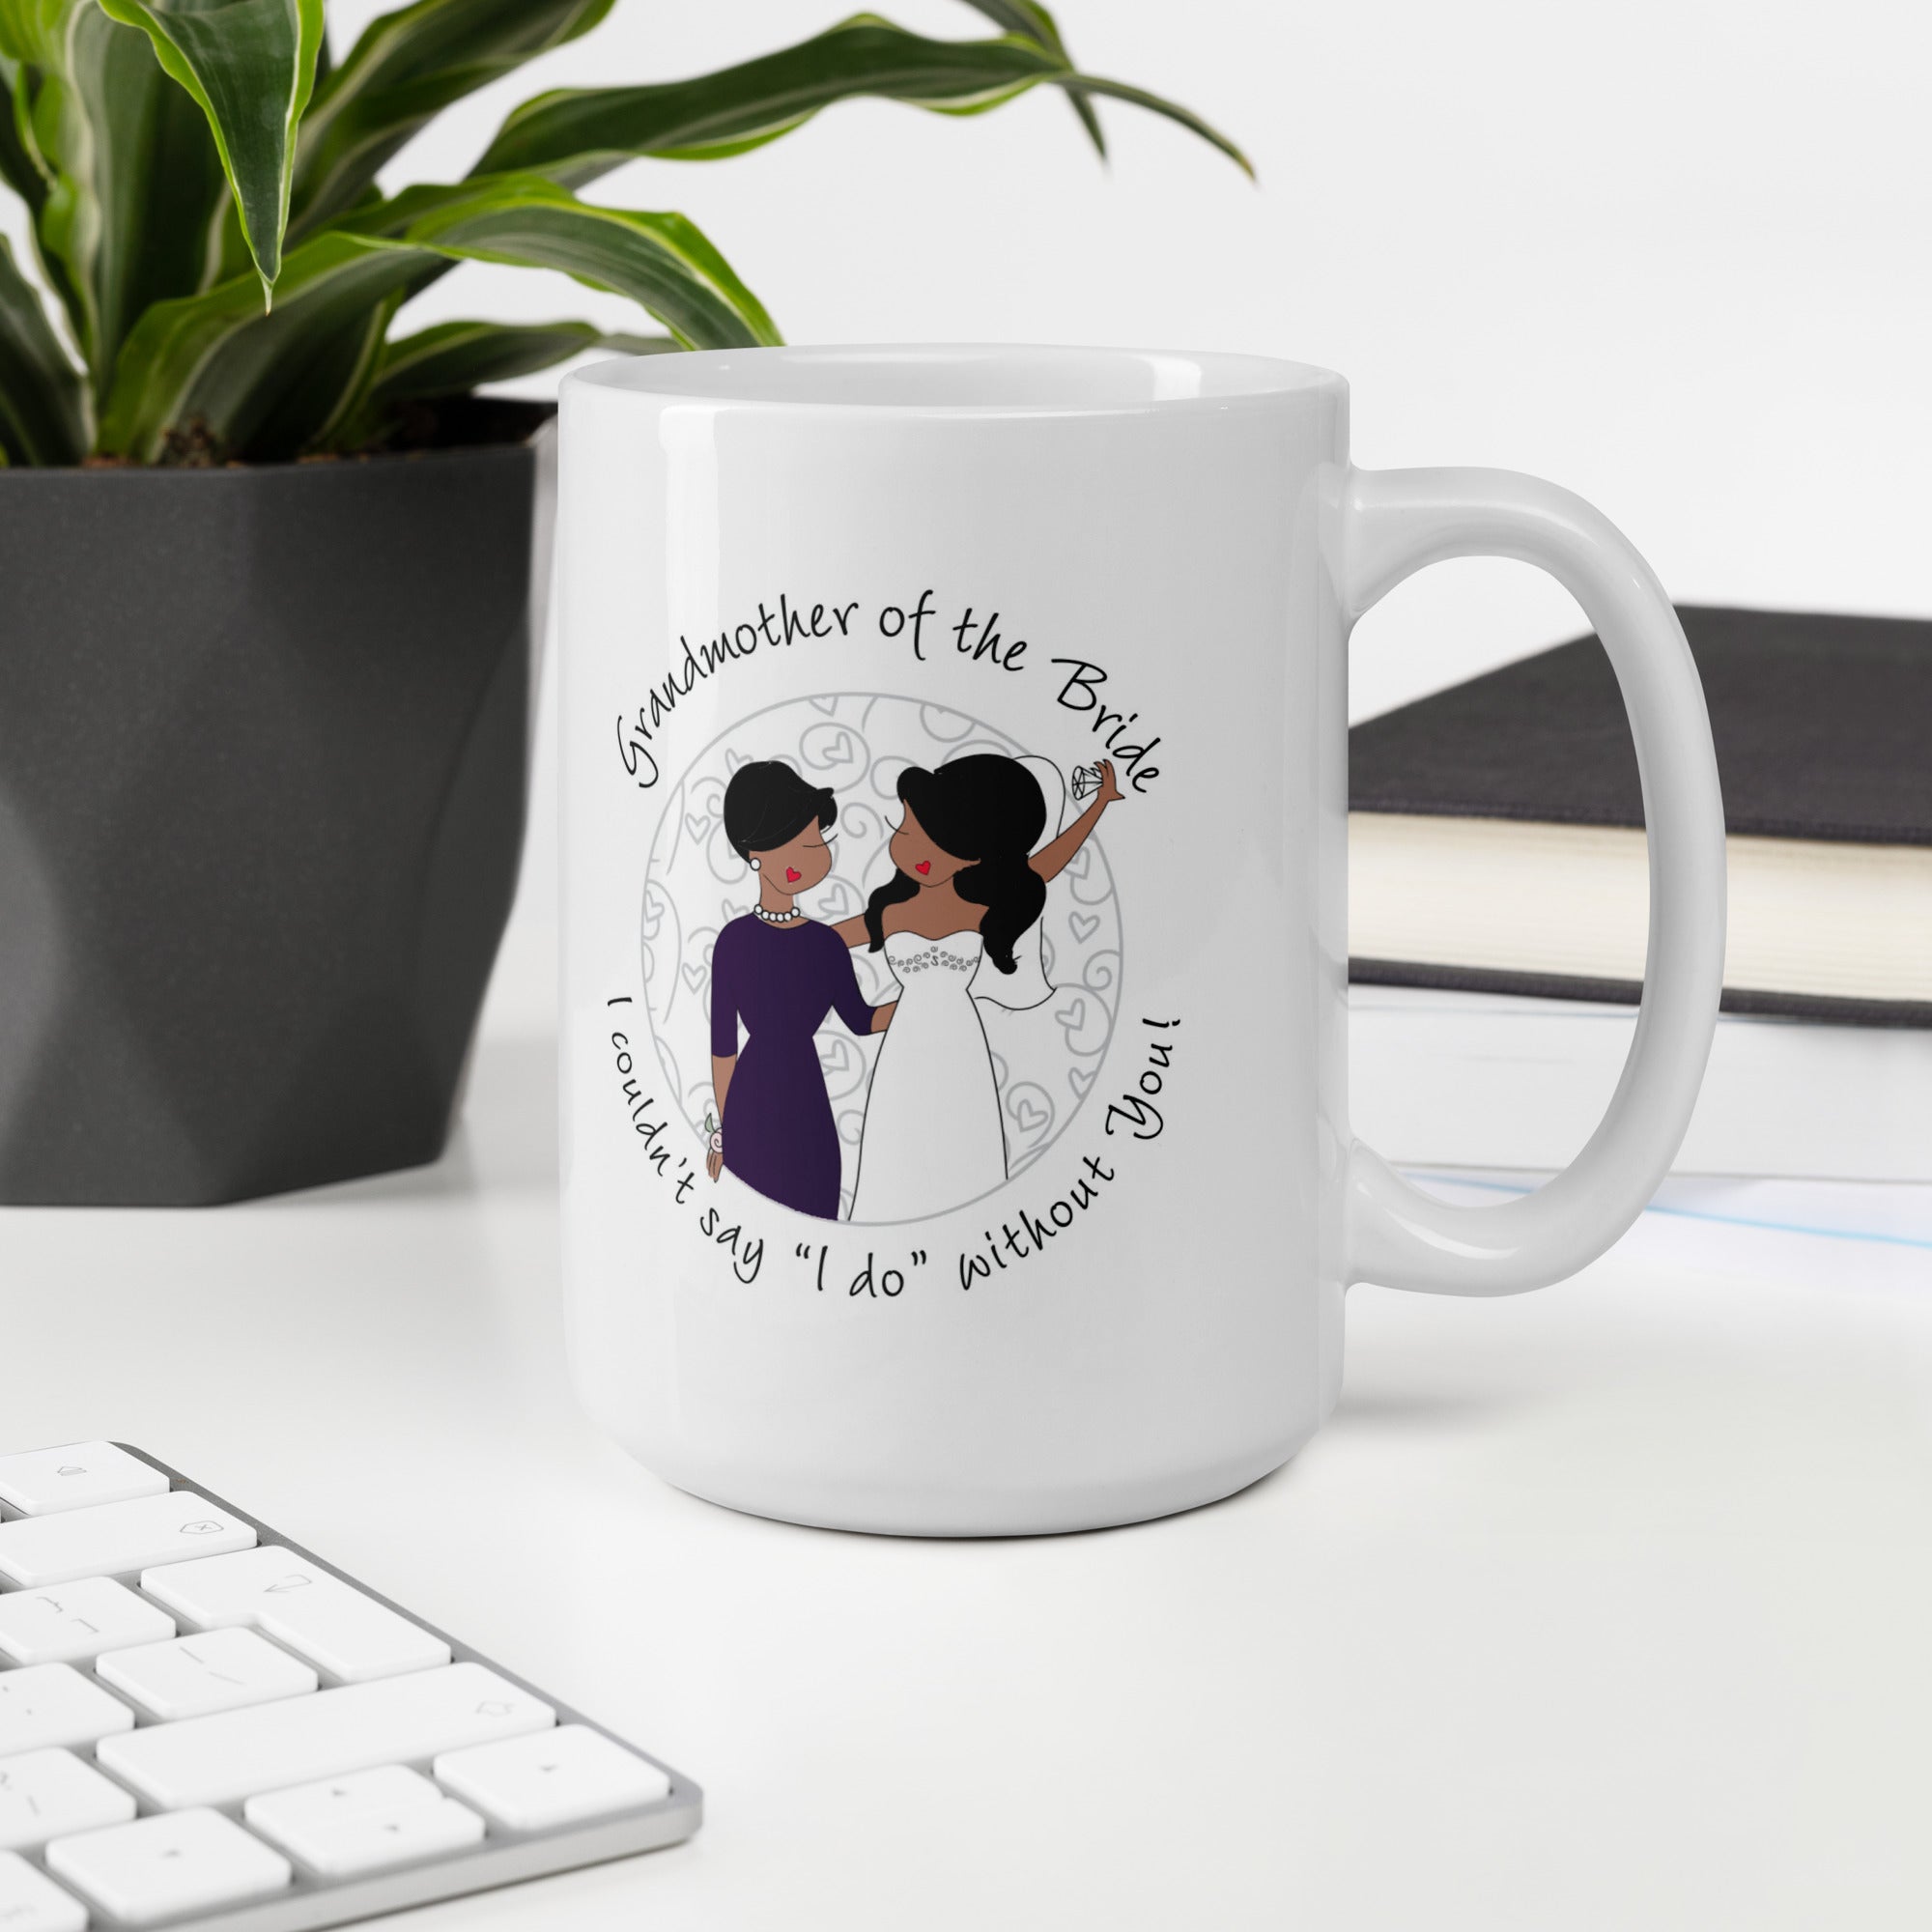 Personalized Grandmother of the Bride Mug